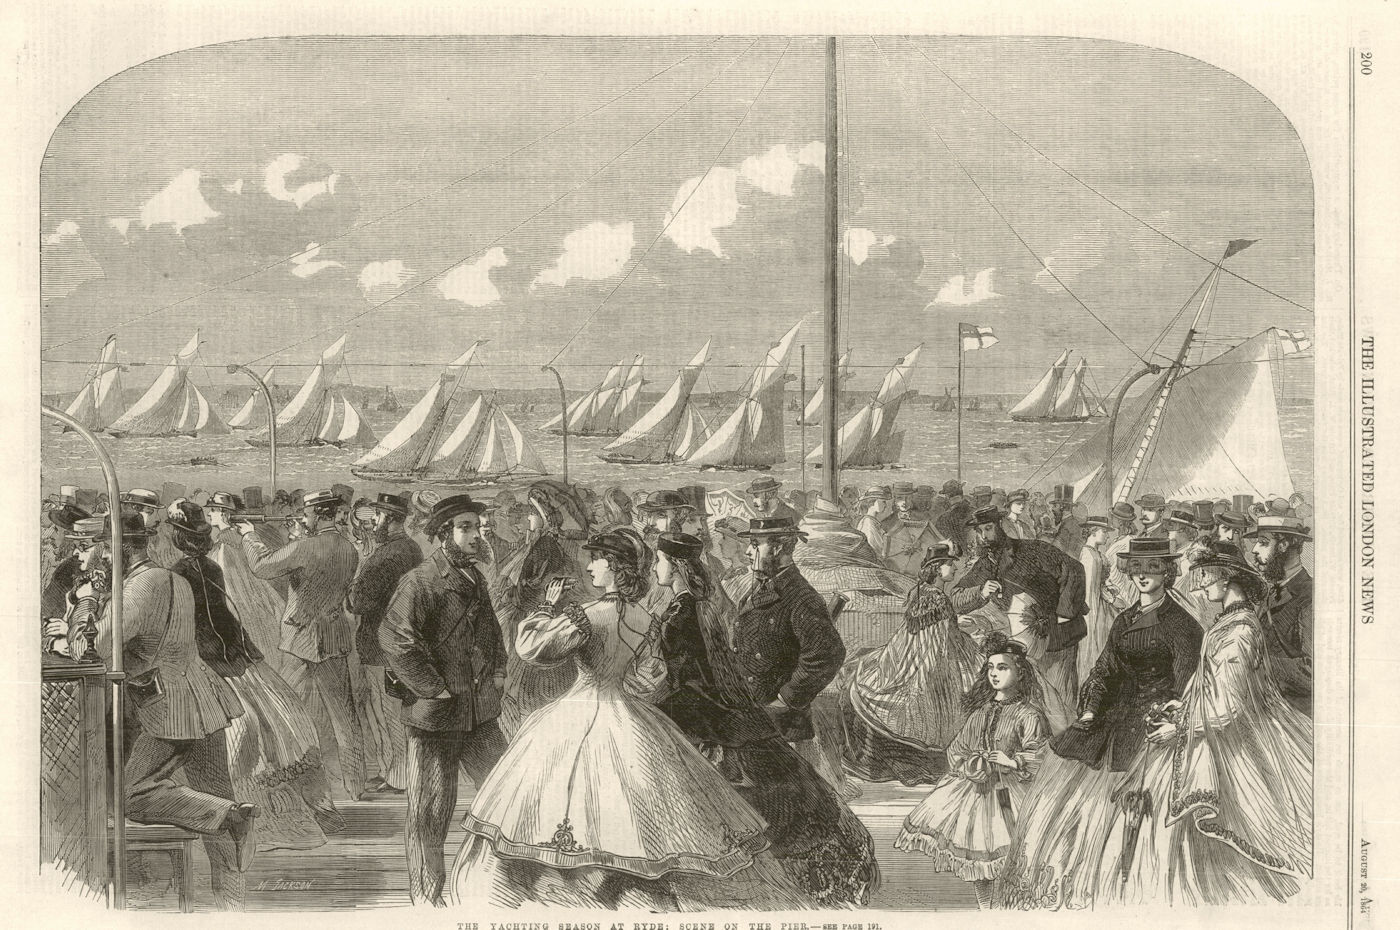 The Yachting Season at Ryde: Scene on the Pier. Isle of Wight 1864 old print